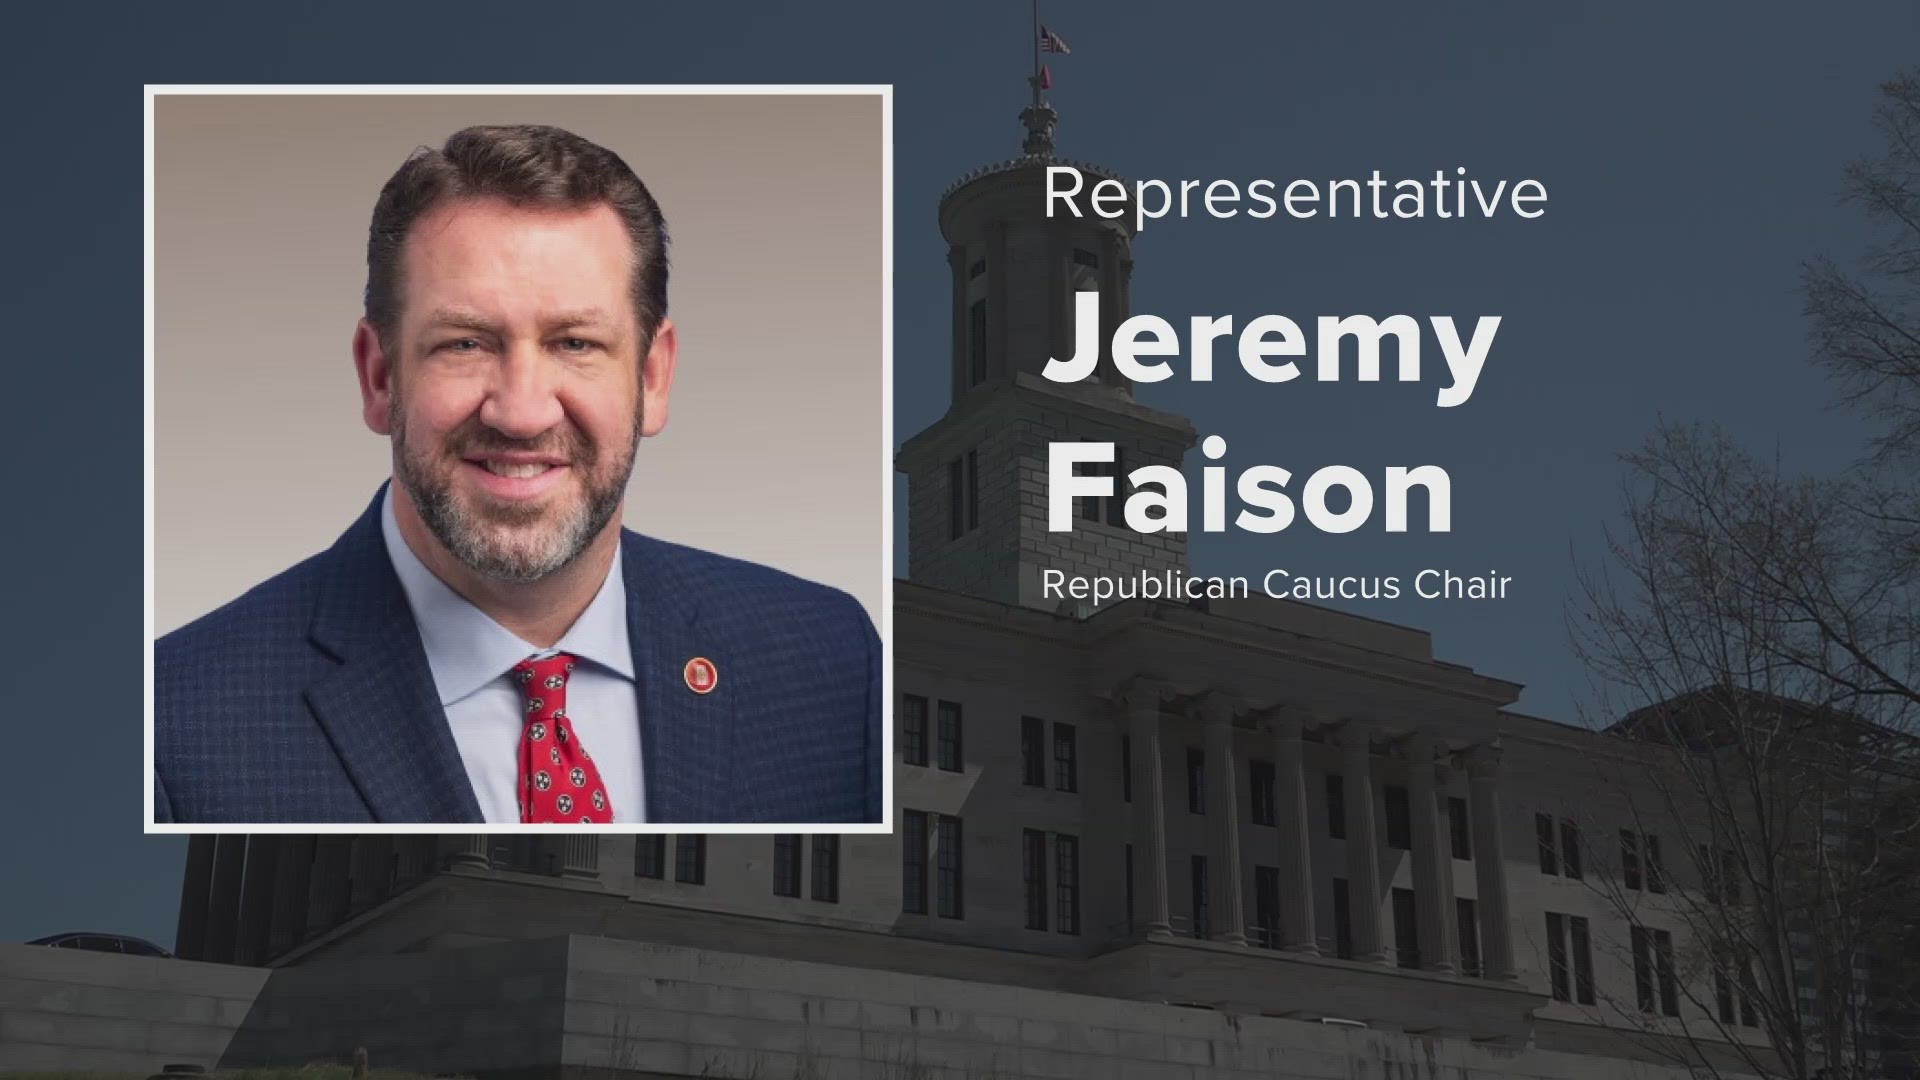 Jeremy Faison is the caucus chair for the Republican party and usually shapes its message.